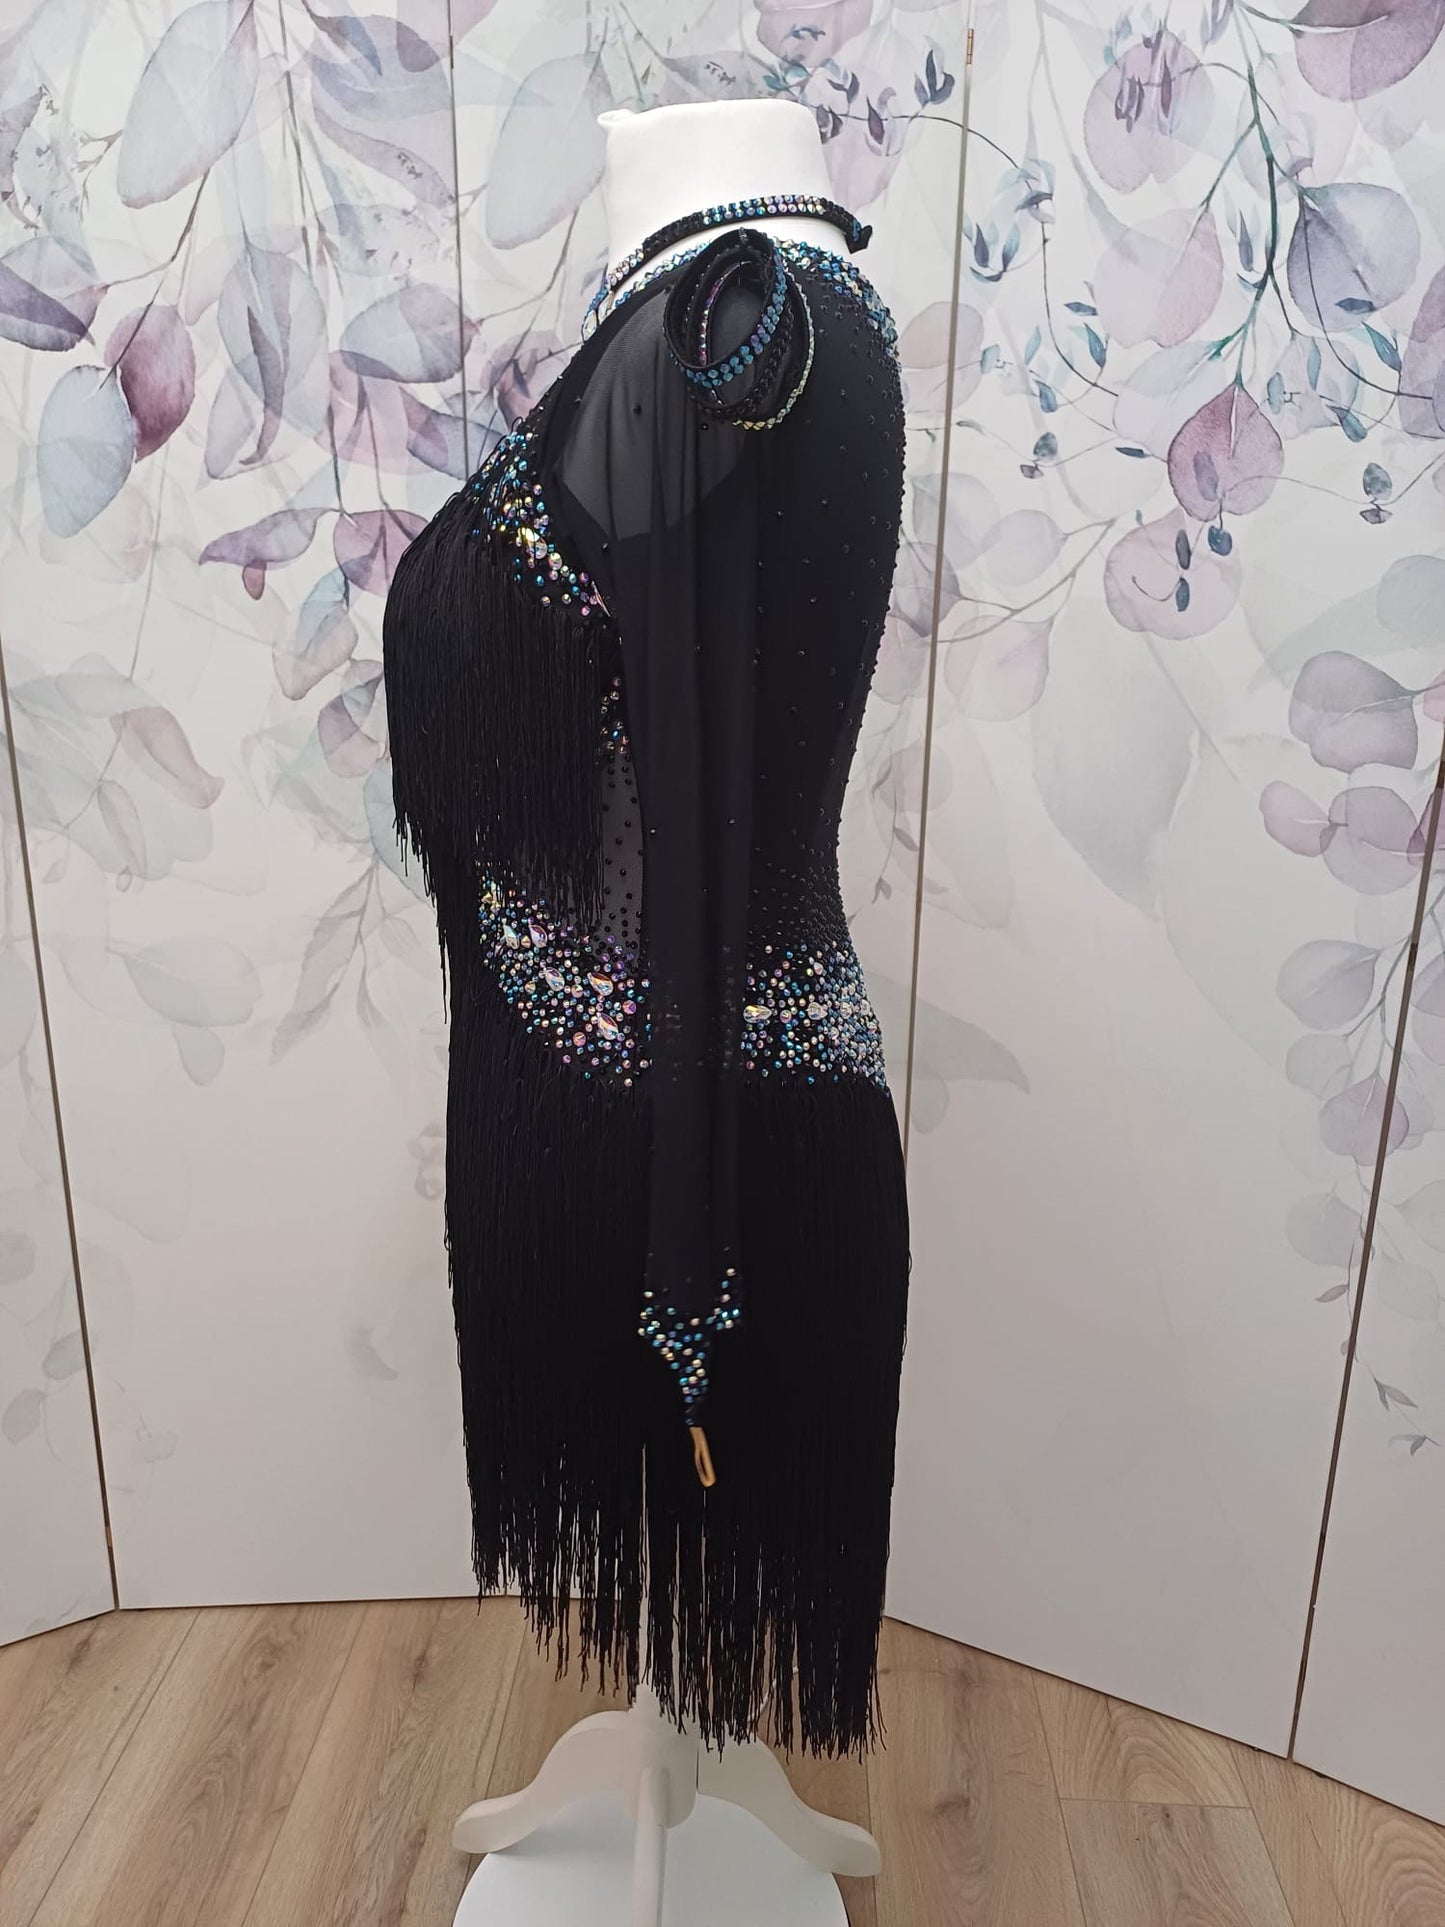 00111 Stand out stunning black fringed Latin Dance Dress. Full fringe giving maximum movement on the floor. Stoned in Jet, AB & Sapphire ab. High back to give option of wearing own bra.